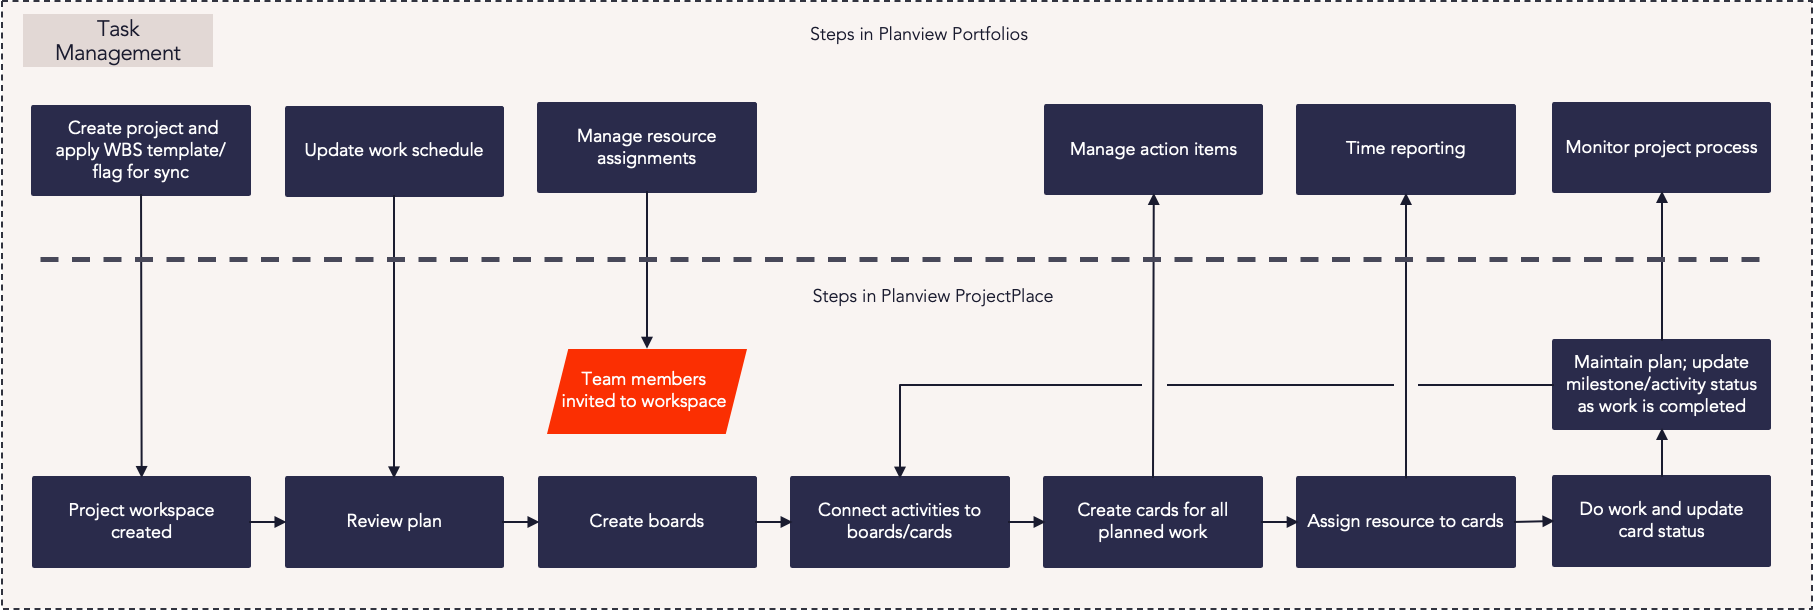 E1 Project Team Delivery - Task Management Process Flow.png